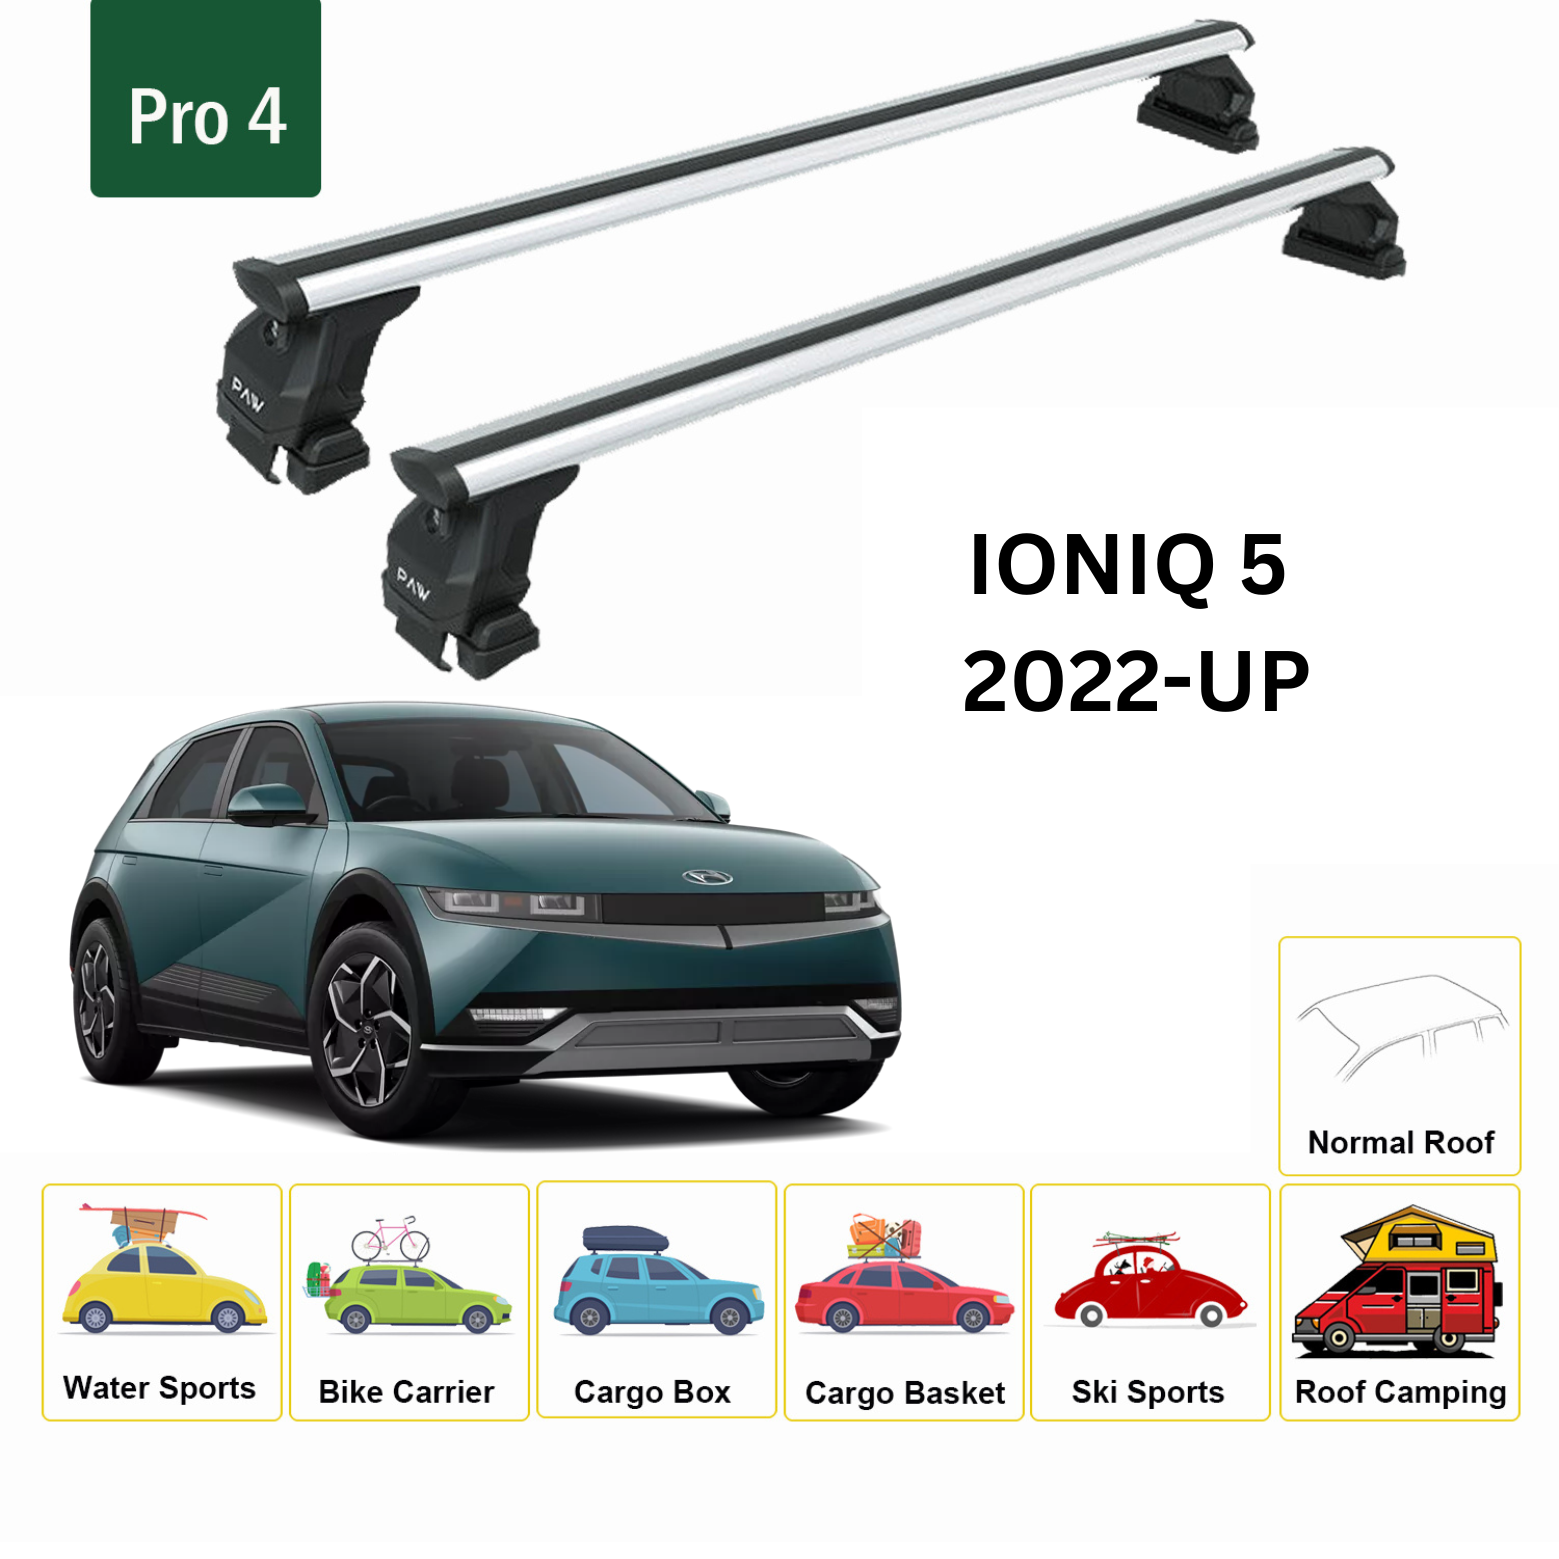 For Hyundai ioniq 5 2022-Up Roof Rack Cross Bars Normal Roof Alu Silver